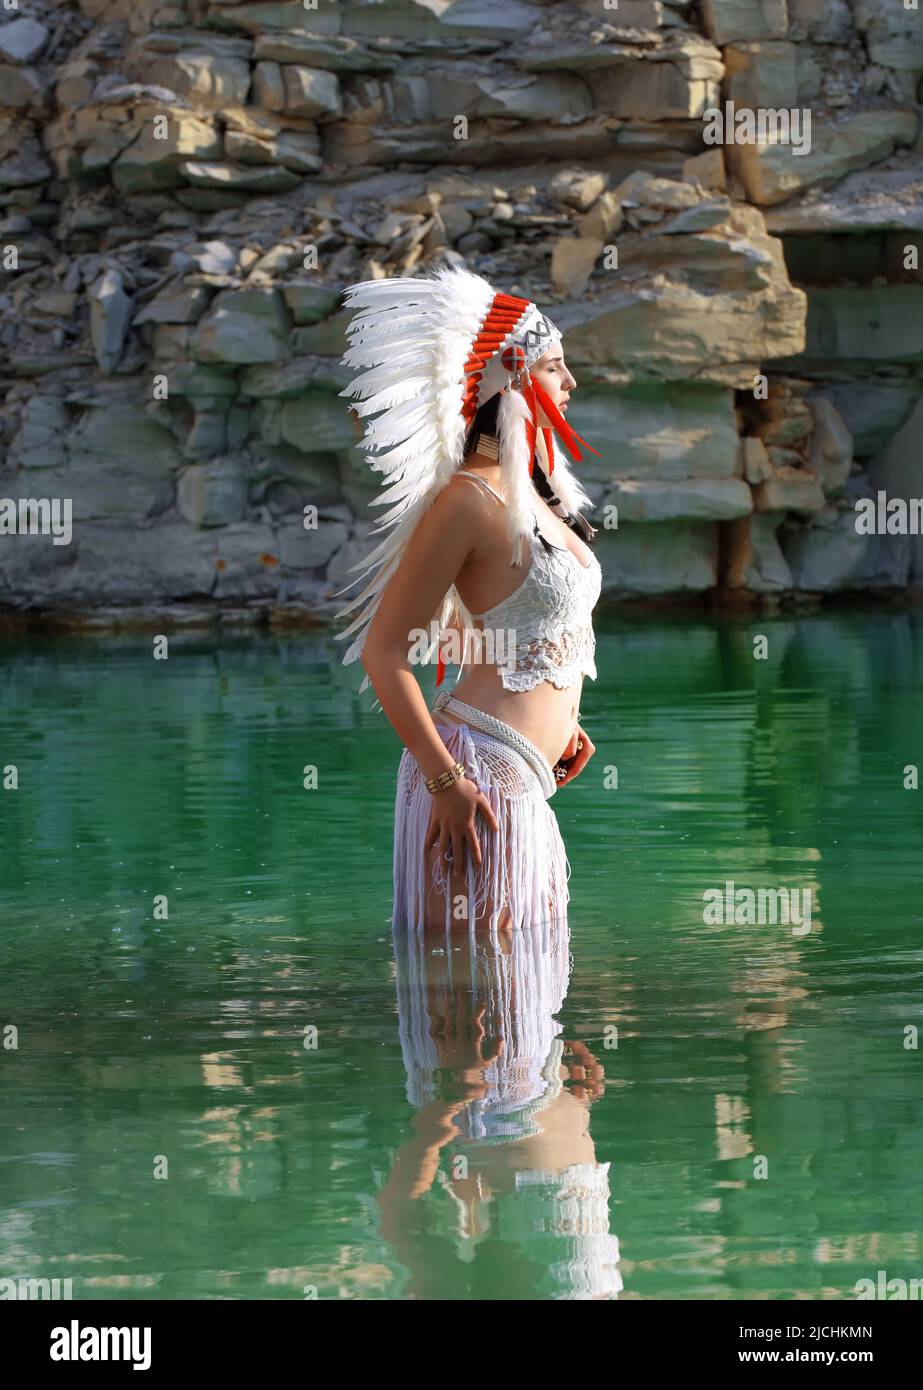 A girl is seen dressed  as a Native American Indian. She is dressed in white wearing a feathered headdress.  She is seen standing in a quarry lake. Stock Photo